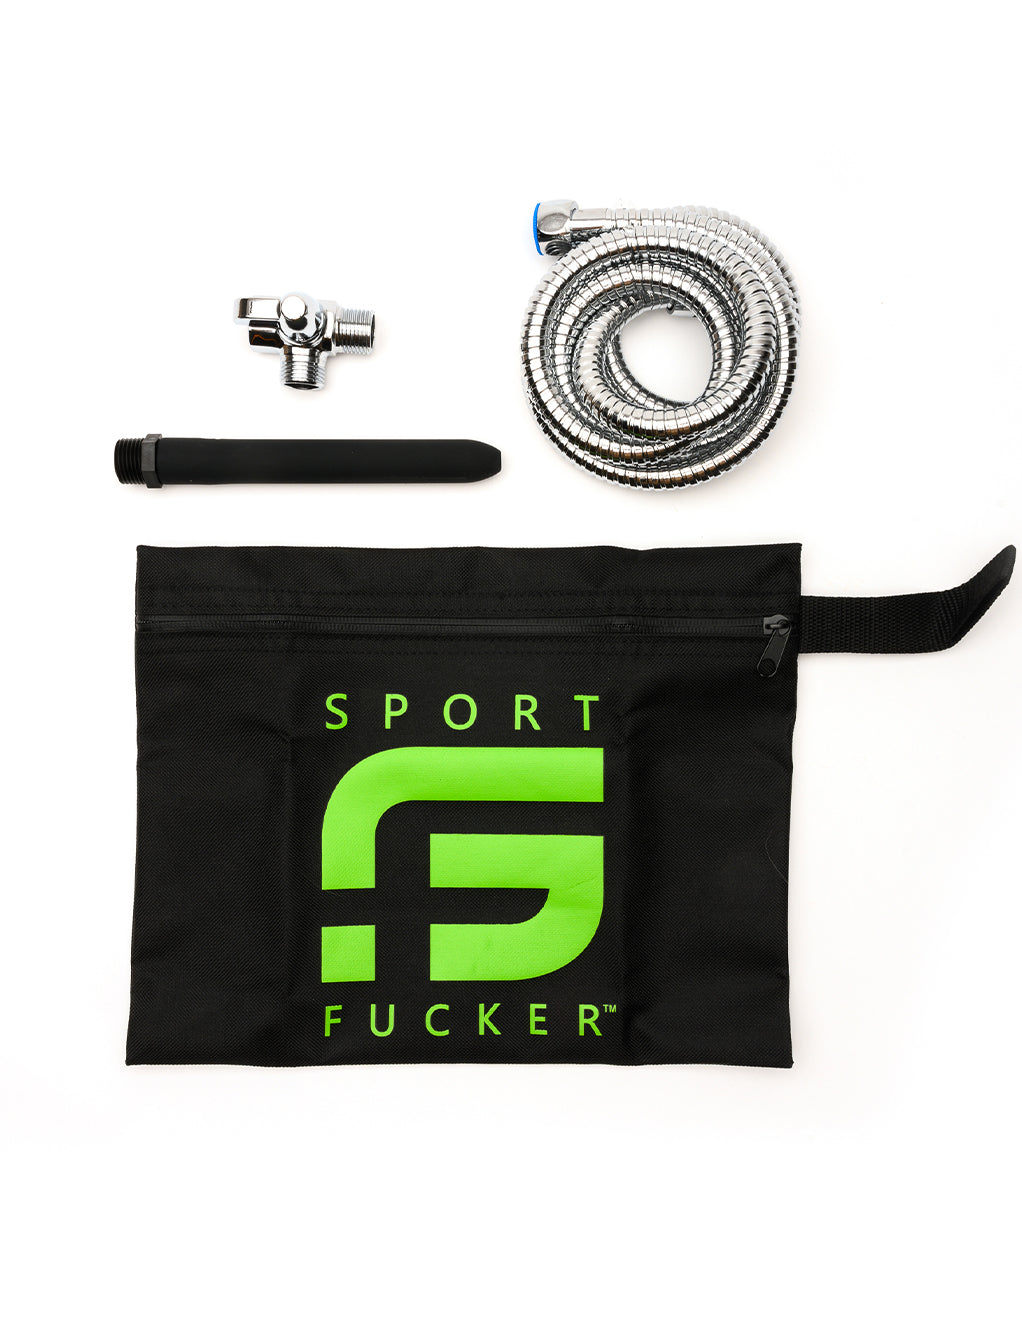 Sport Fucker Shower Kit- Contents with bag